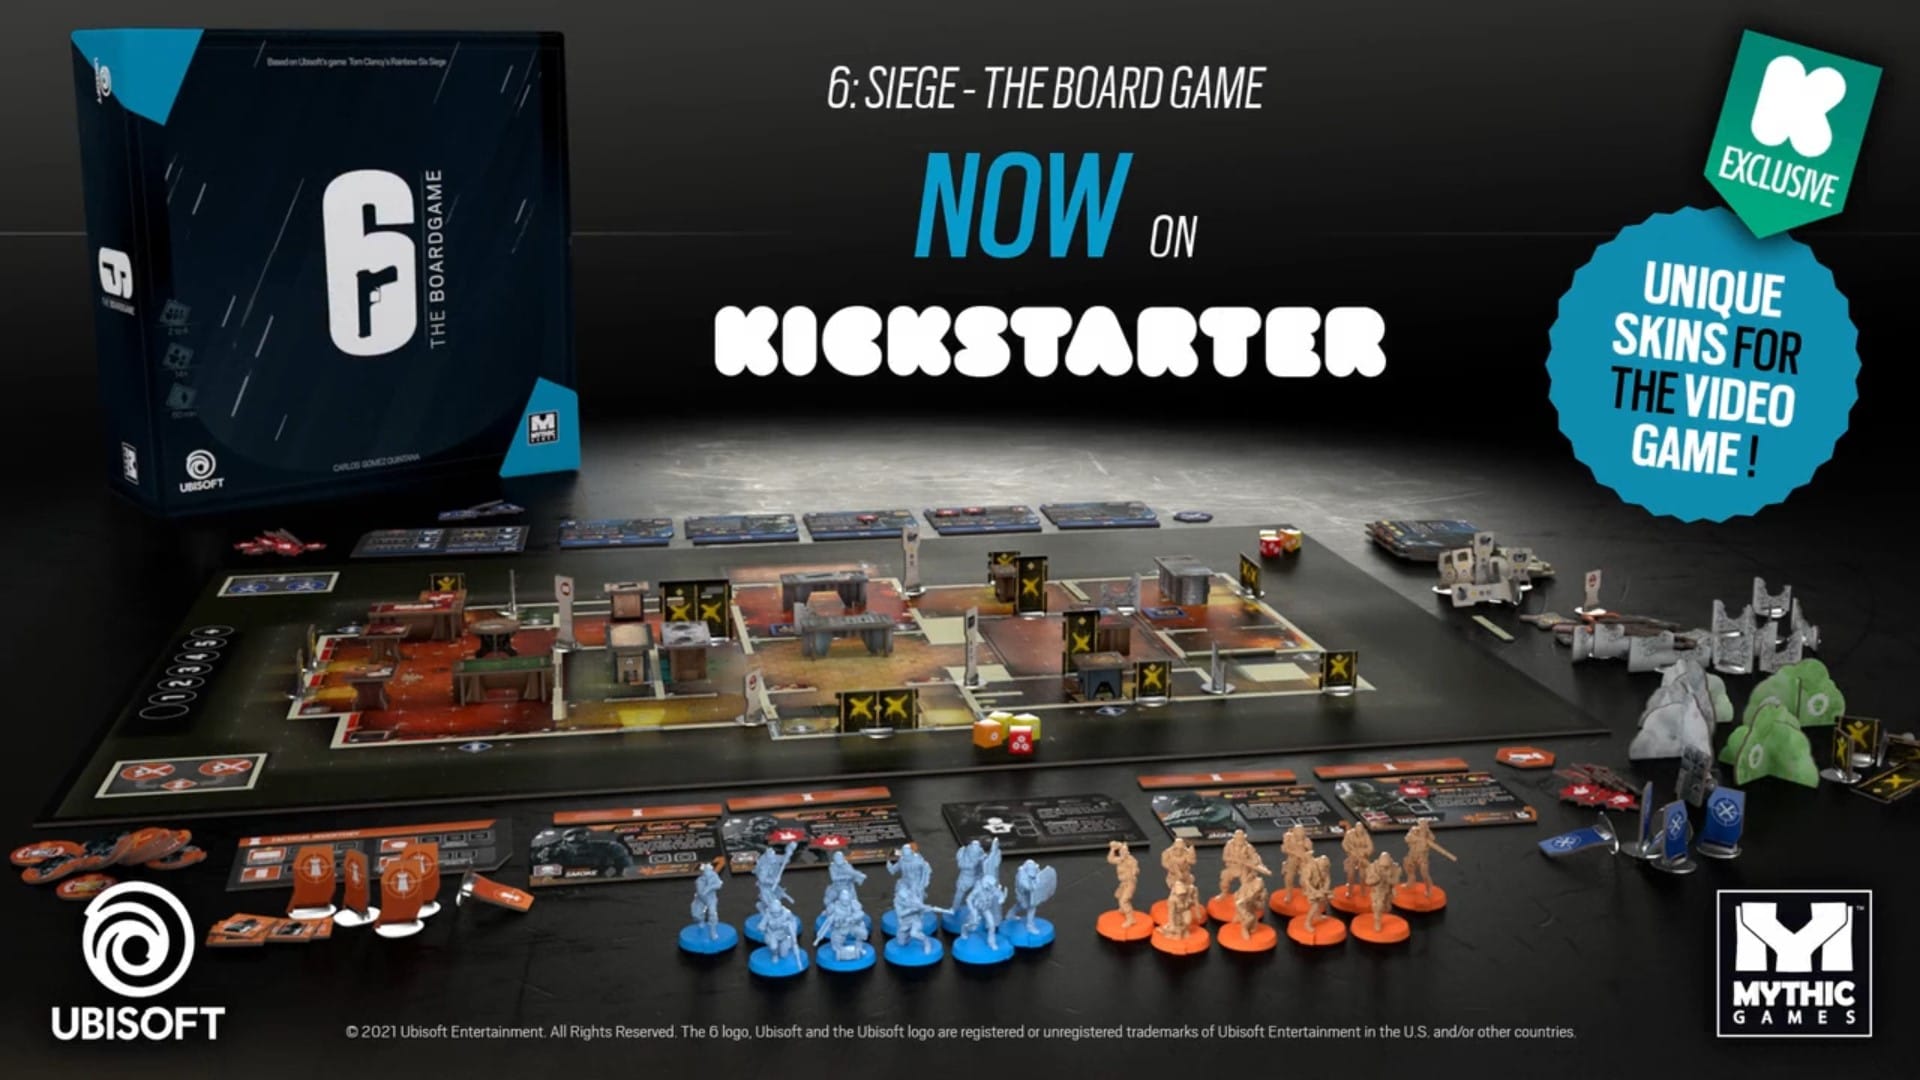 The board and set up for Rainbow Six Siege The Board Game